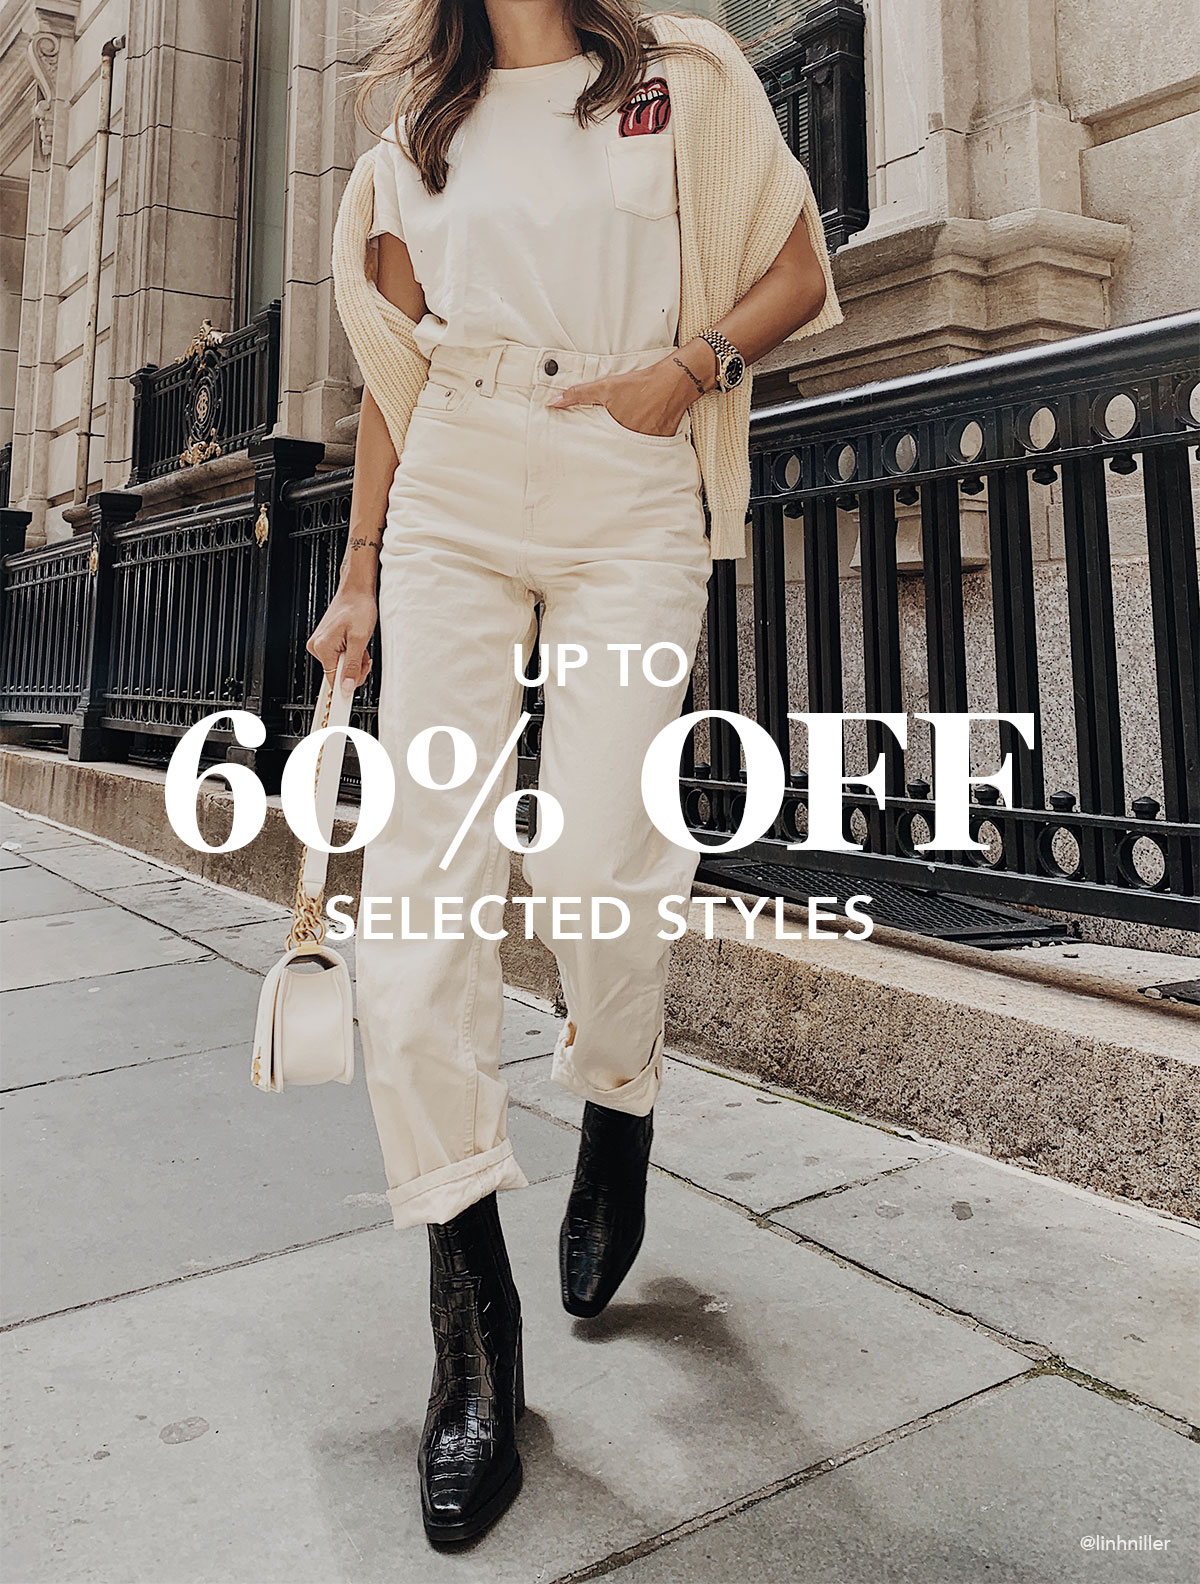 SALE STARTS NOW // Up To 60% Off Selected Styles